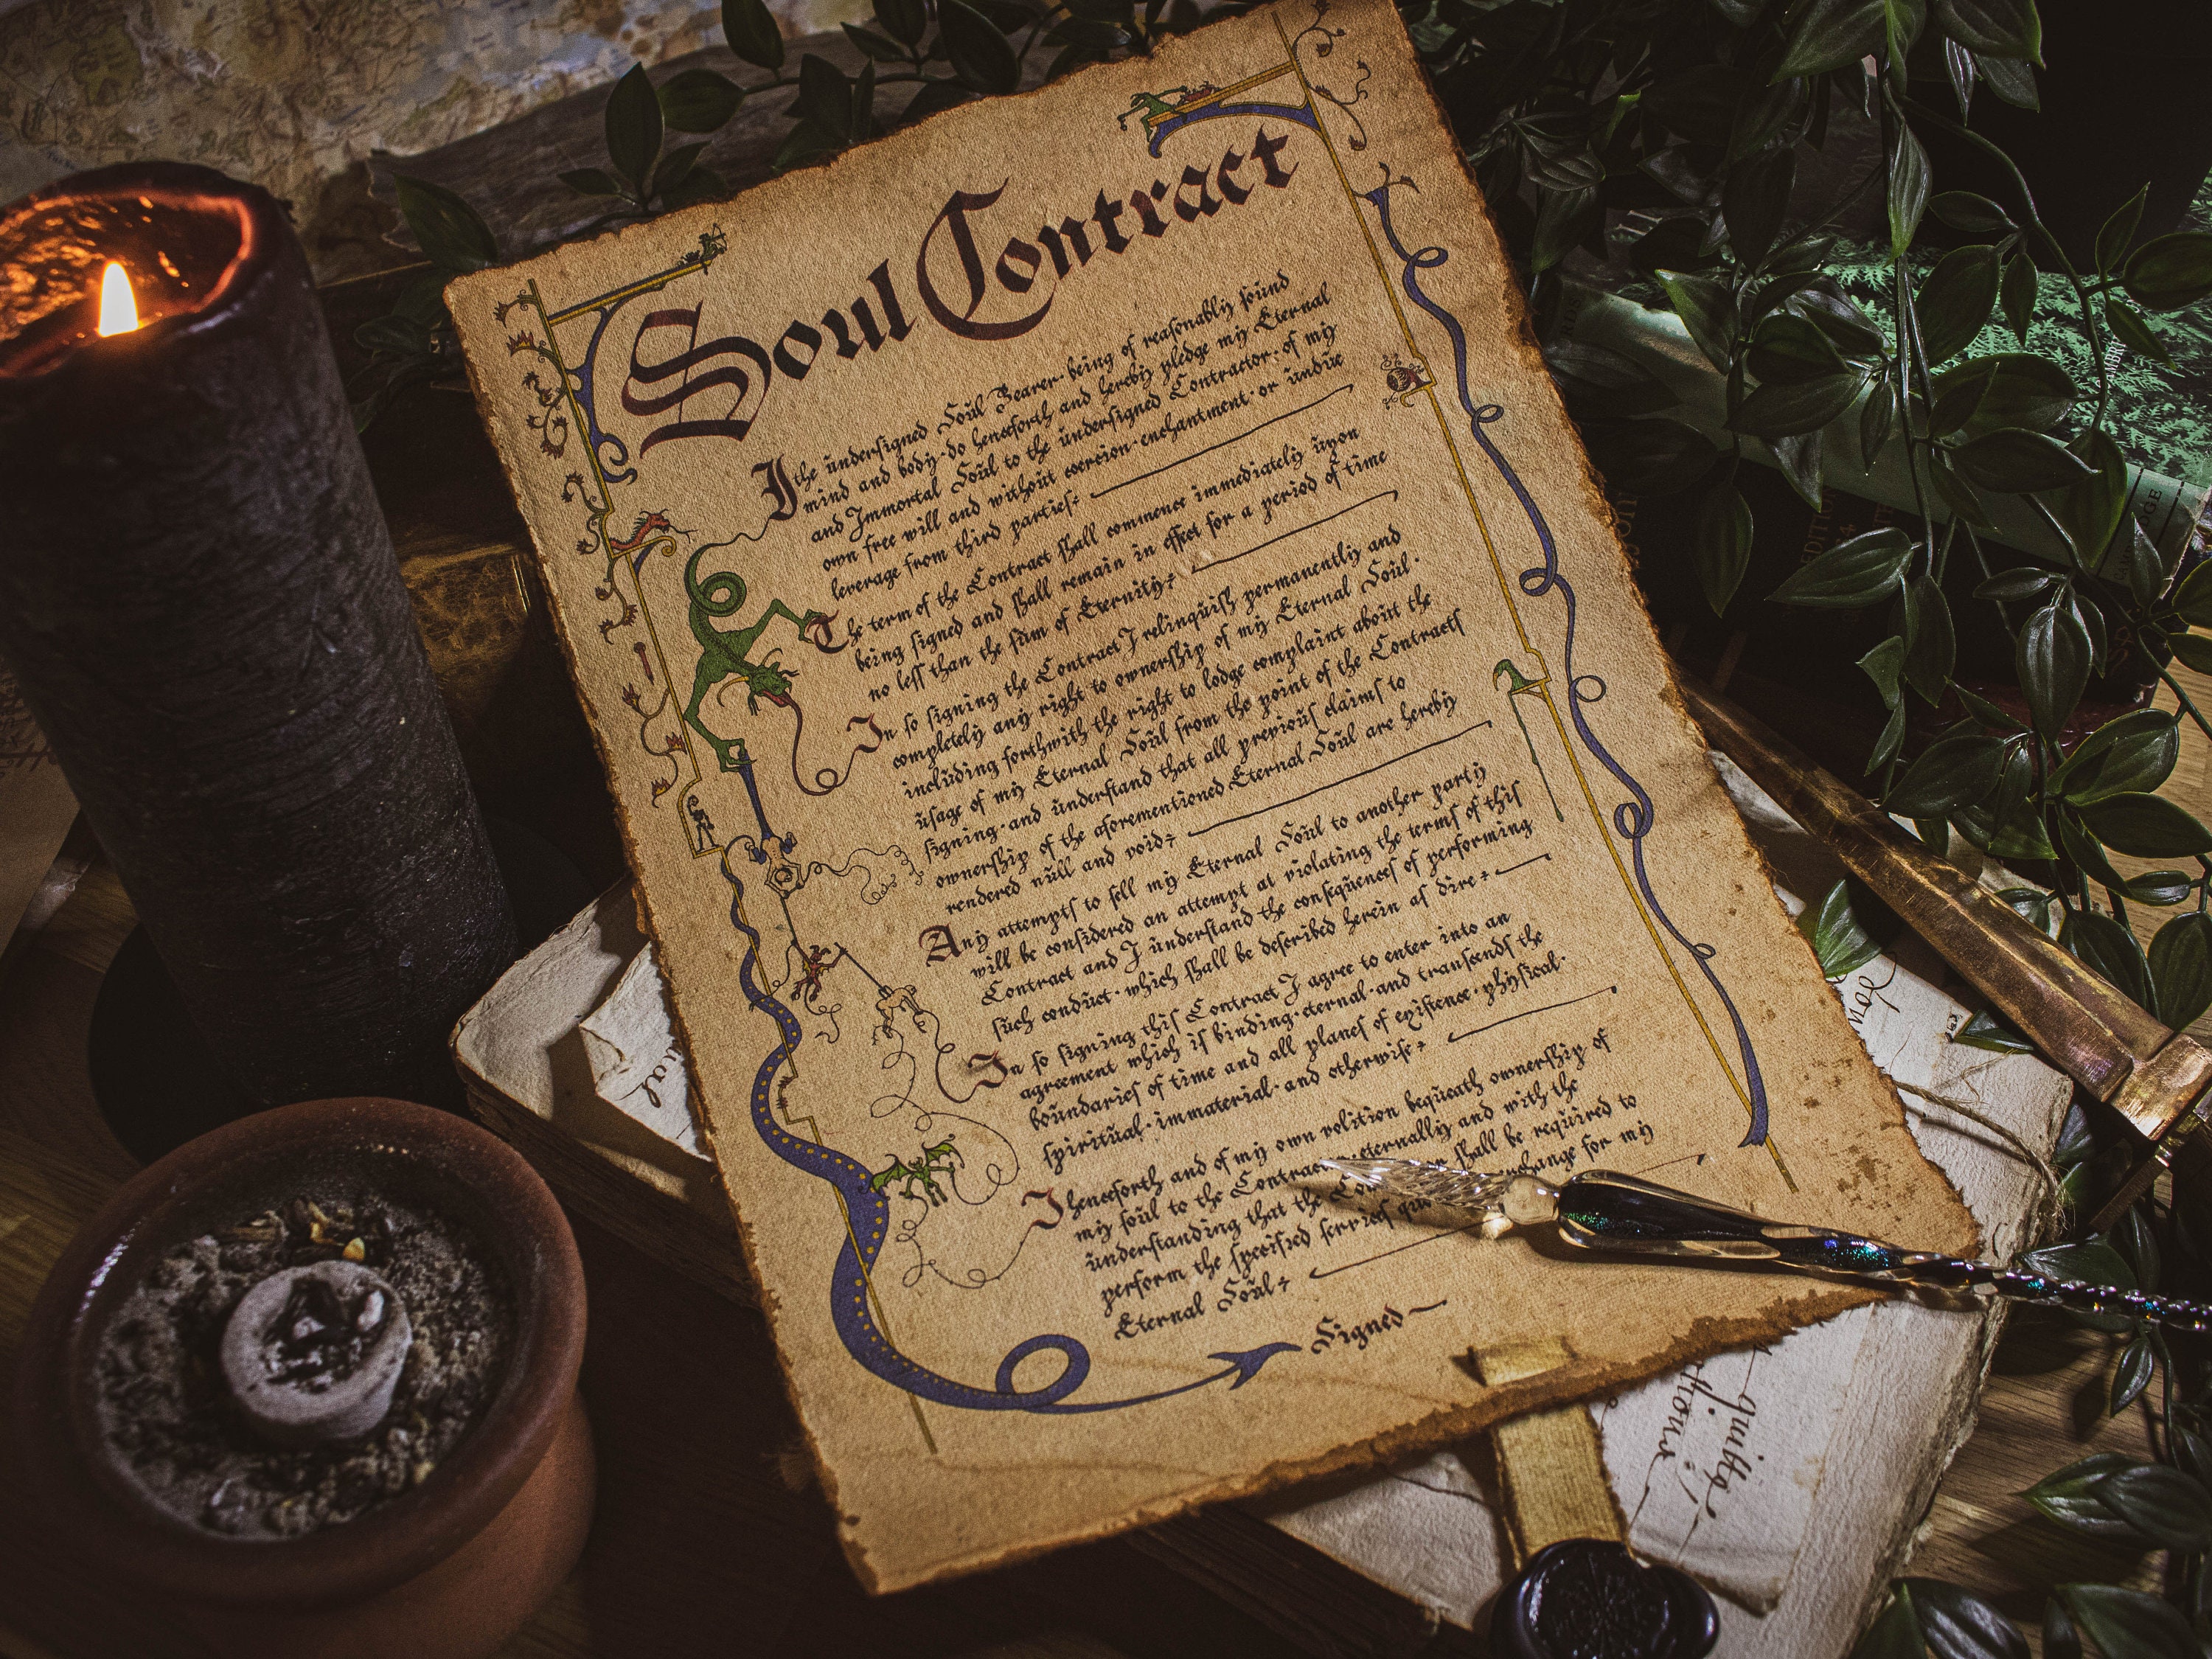 Soul contract